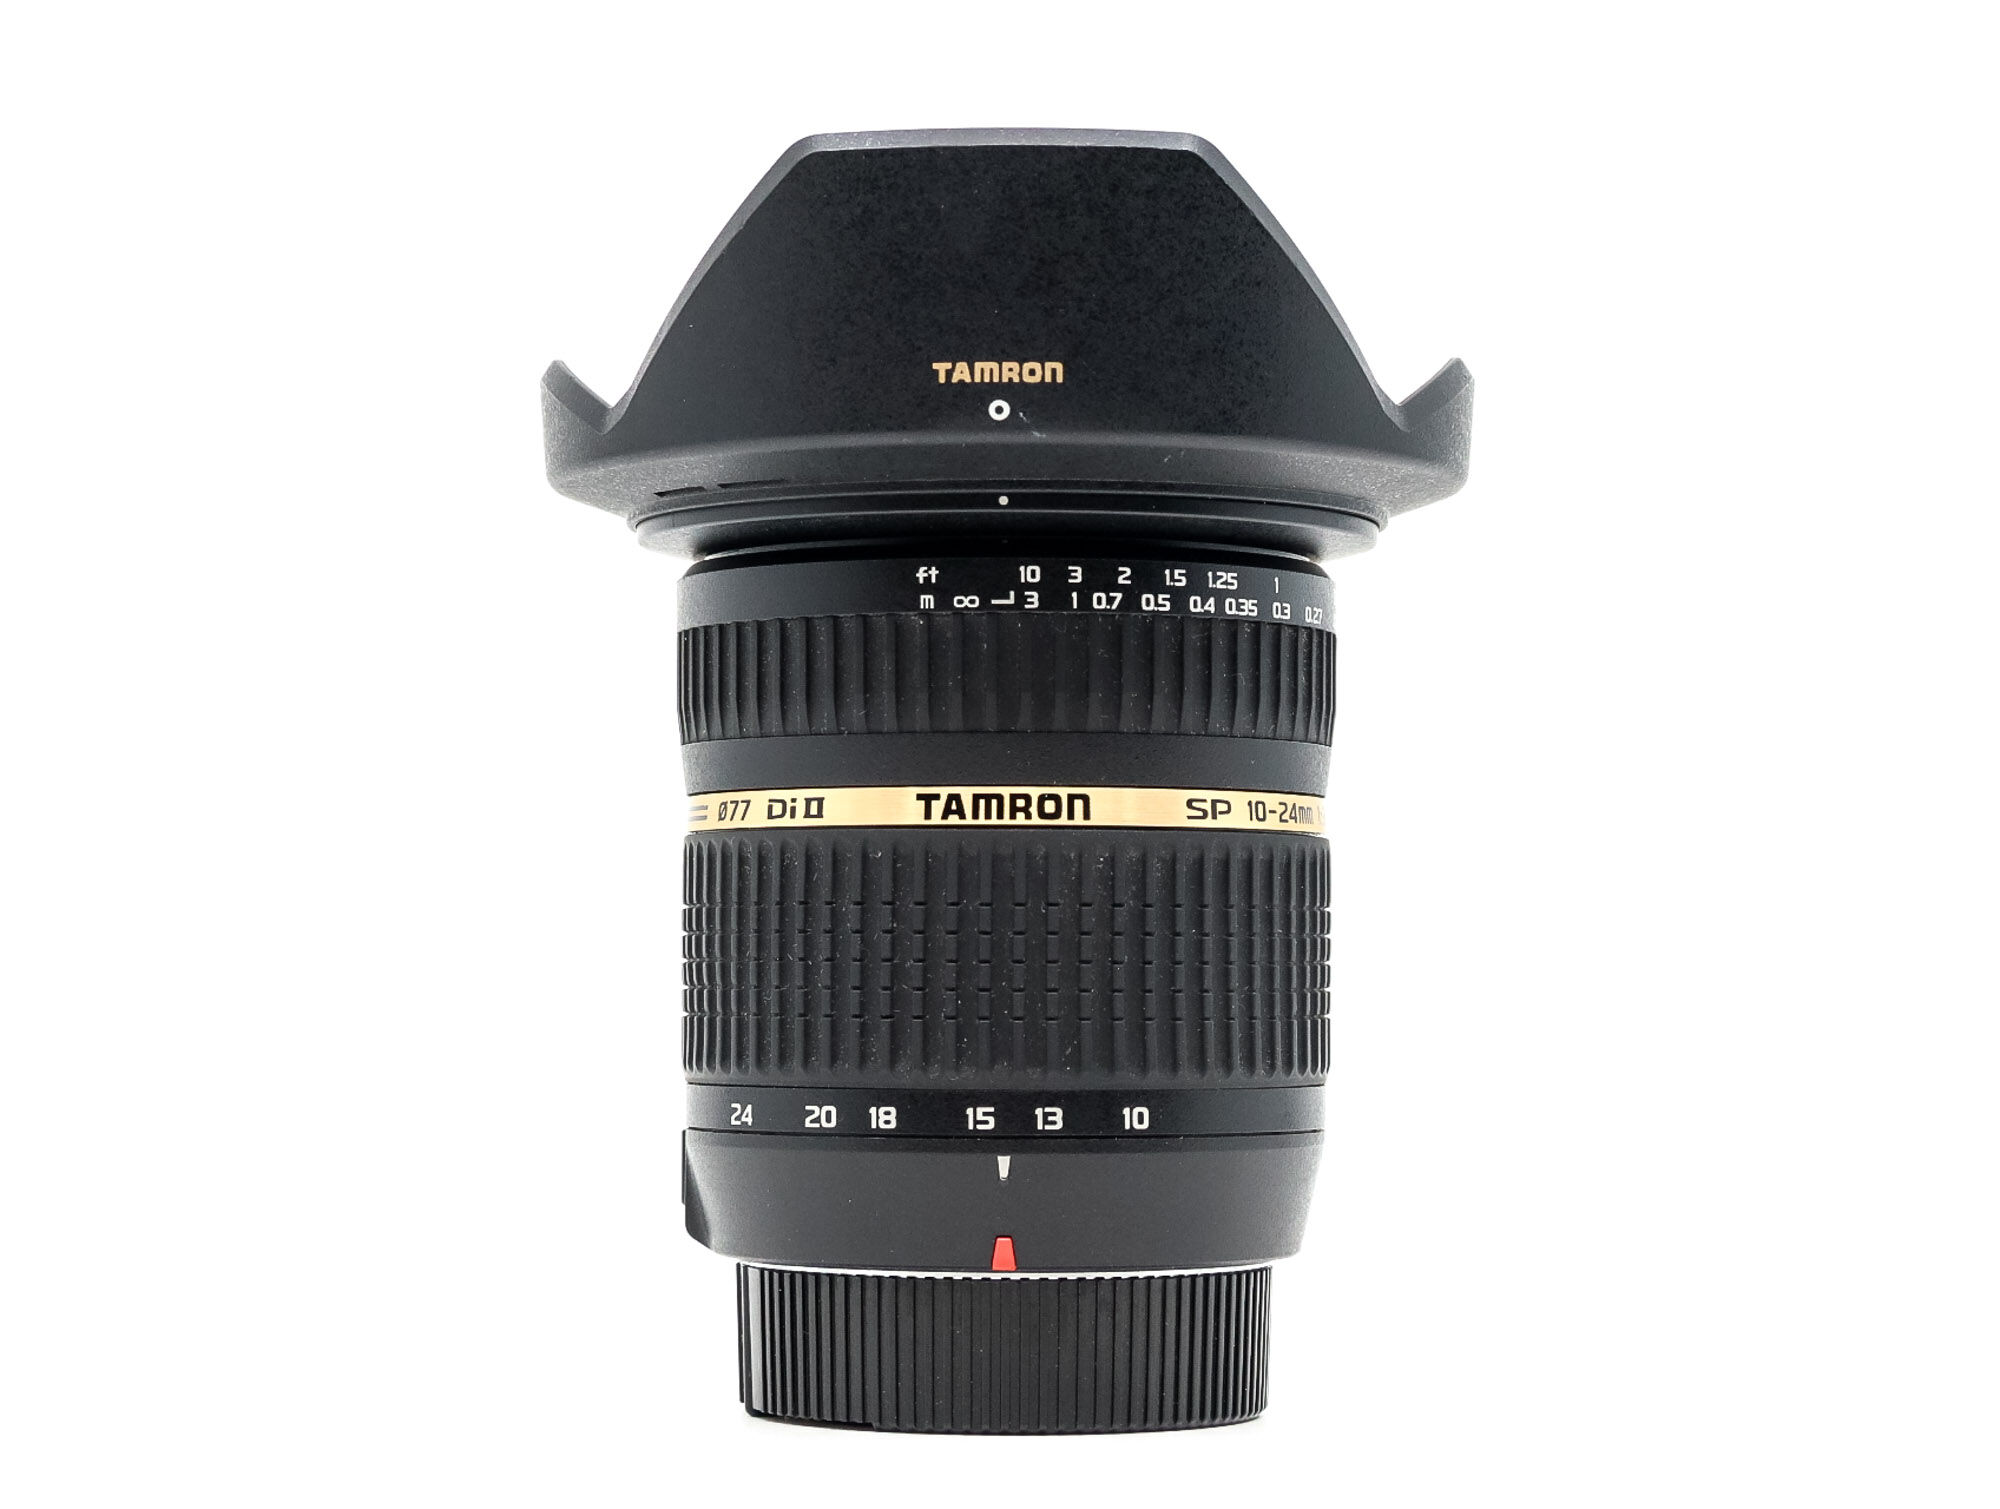 tamron sp af 10-24mm f/3.5-4.5 di ii ld aspherical (if) pentax fit (condition: excellent)